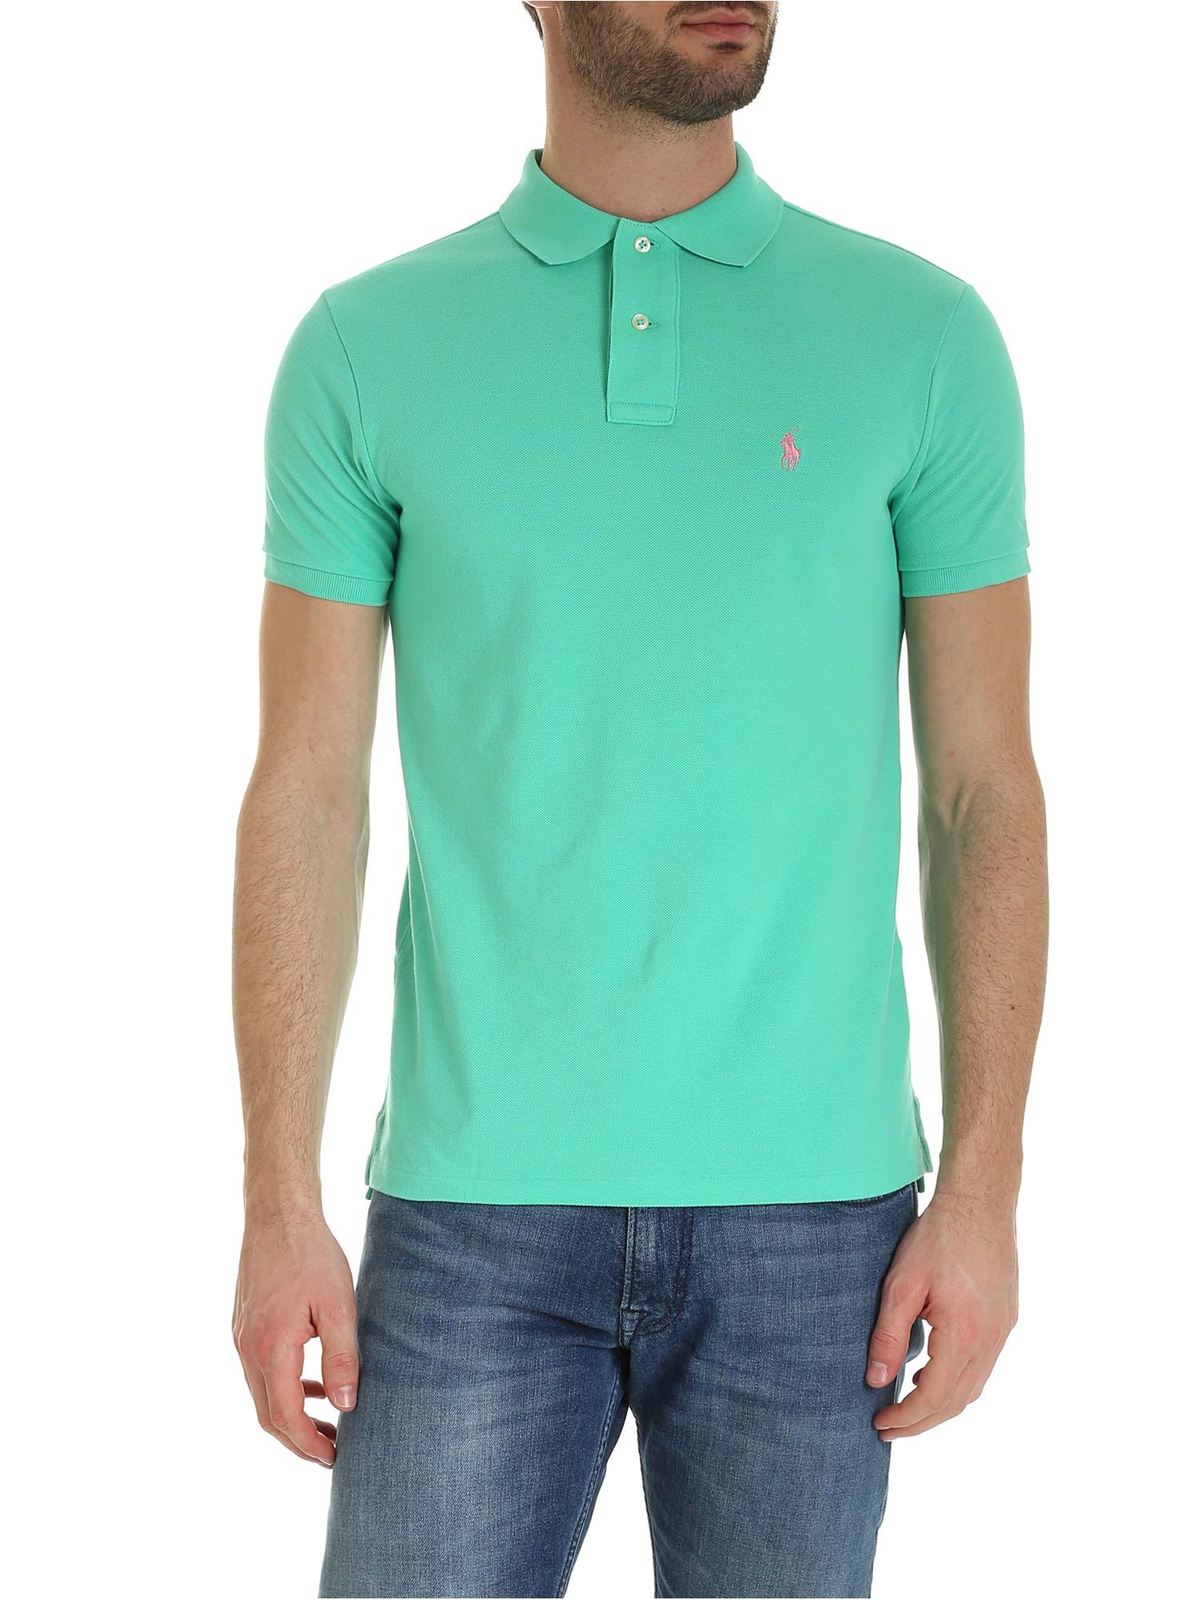 deur Korting rammelaar Polo shirts Polo Ralph Lauren - Slim fit polo shirt in mint green with pink  l - 710795080020